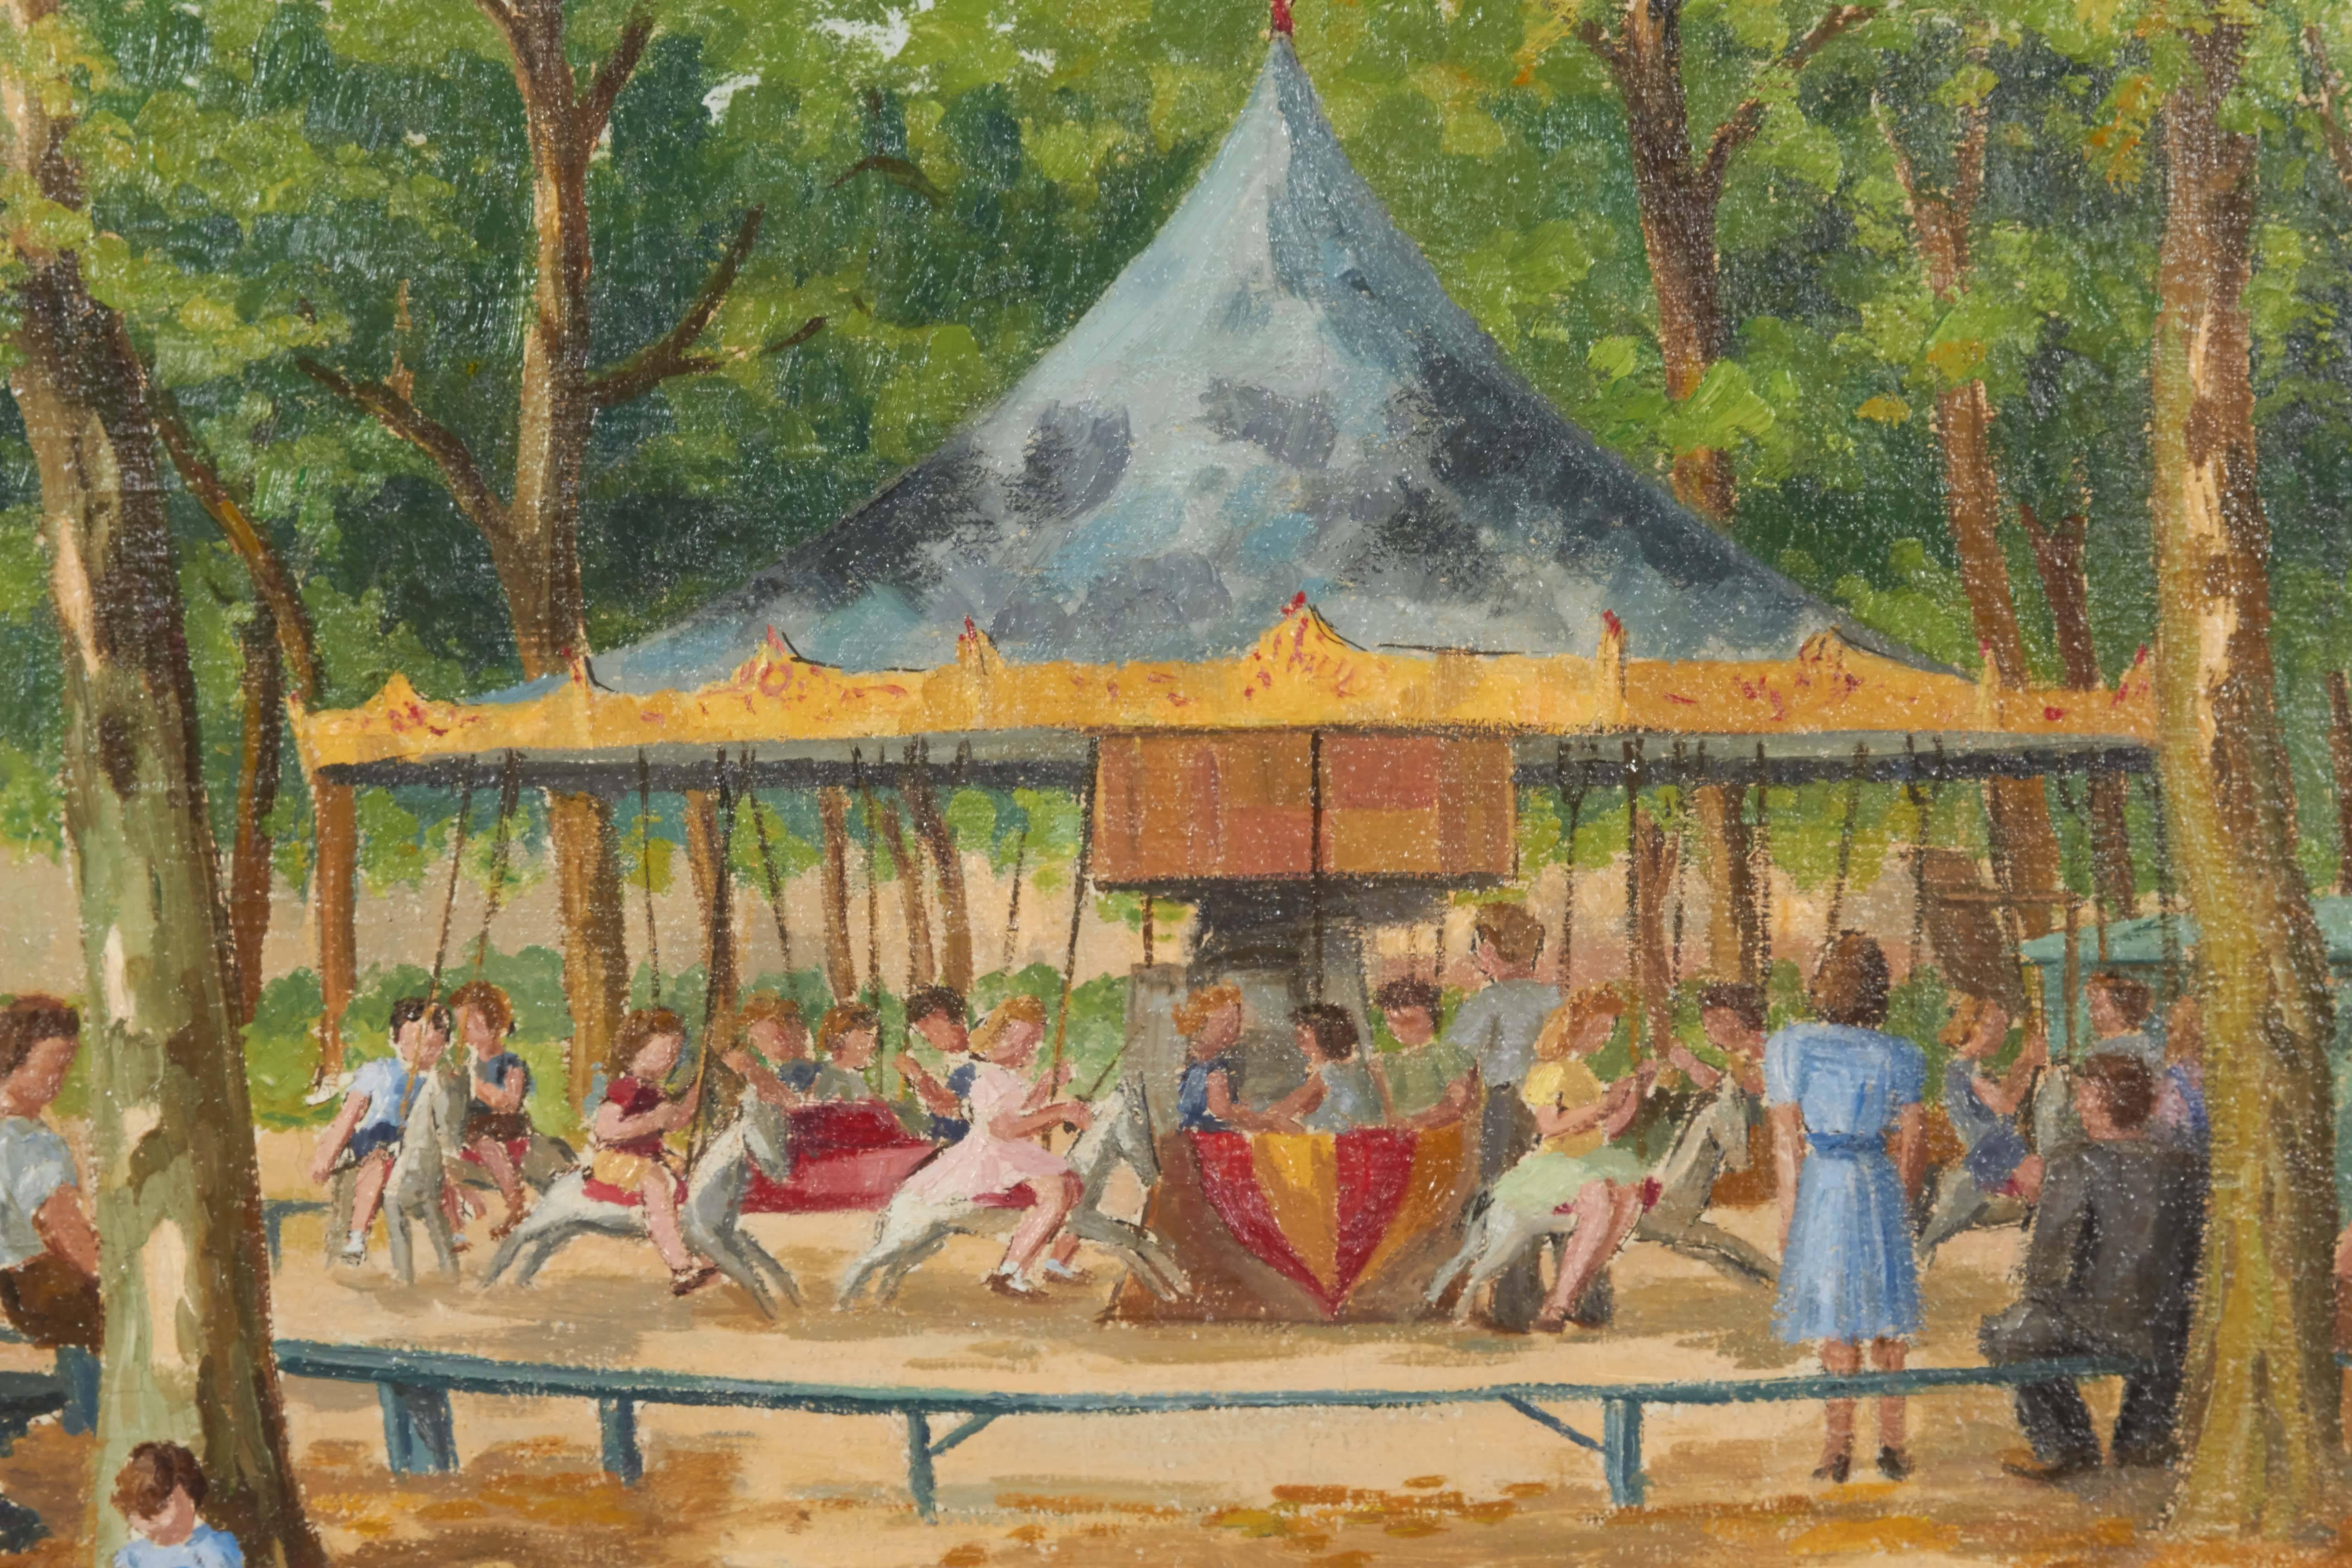 Oil on canvas French painting of children in the park with gold leaf frame. Relined. Signed lower right A. Clement.

Not available for sale or to ship in the state of California.